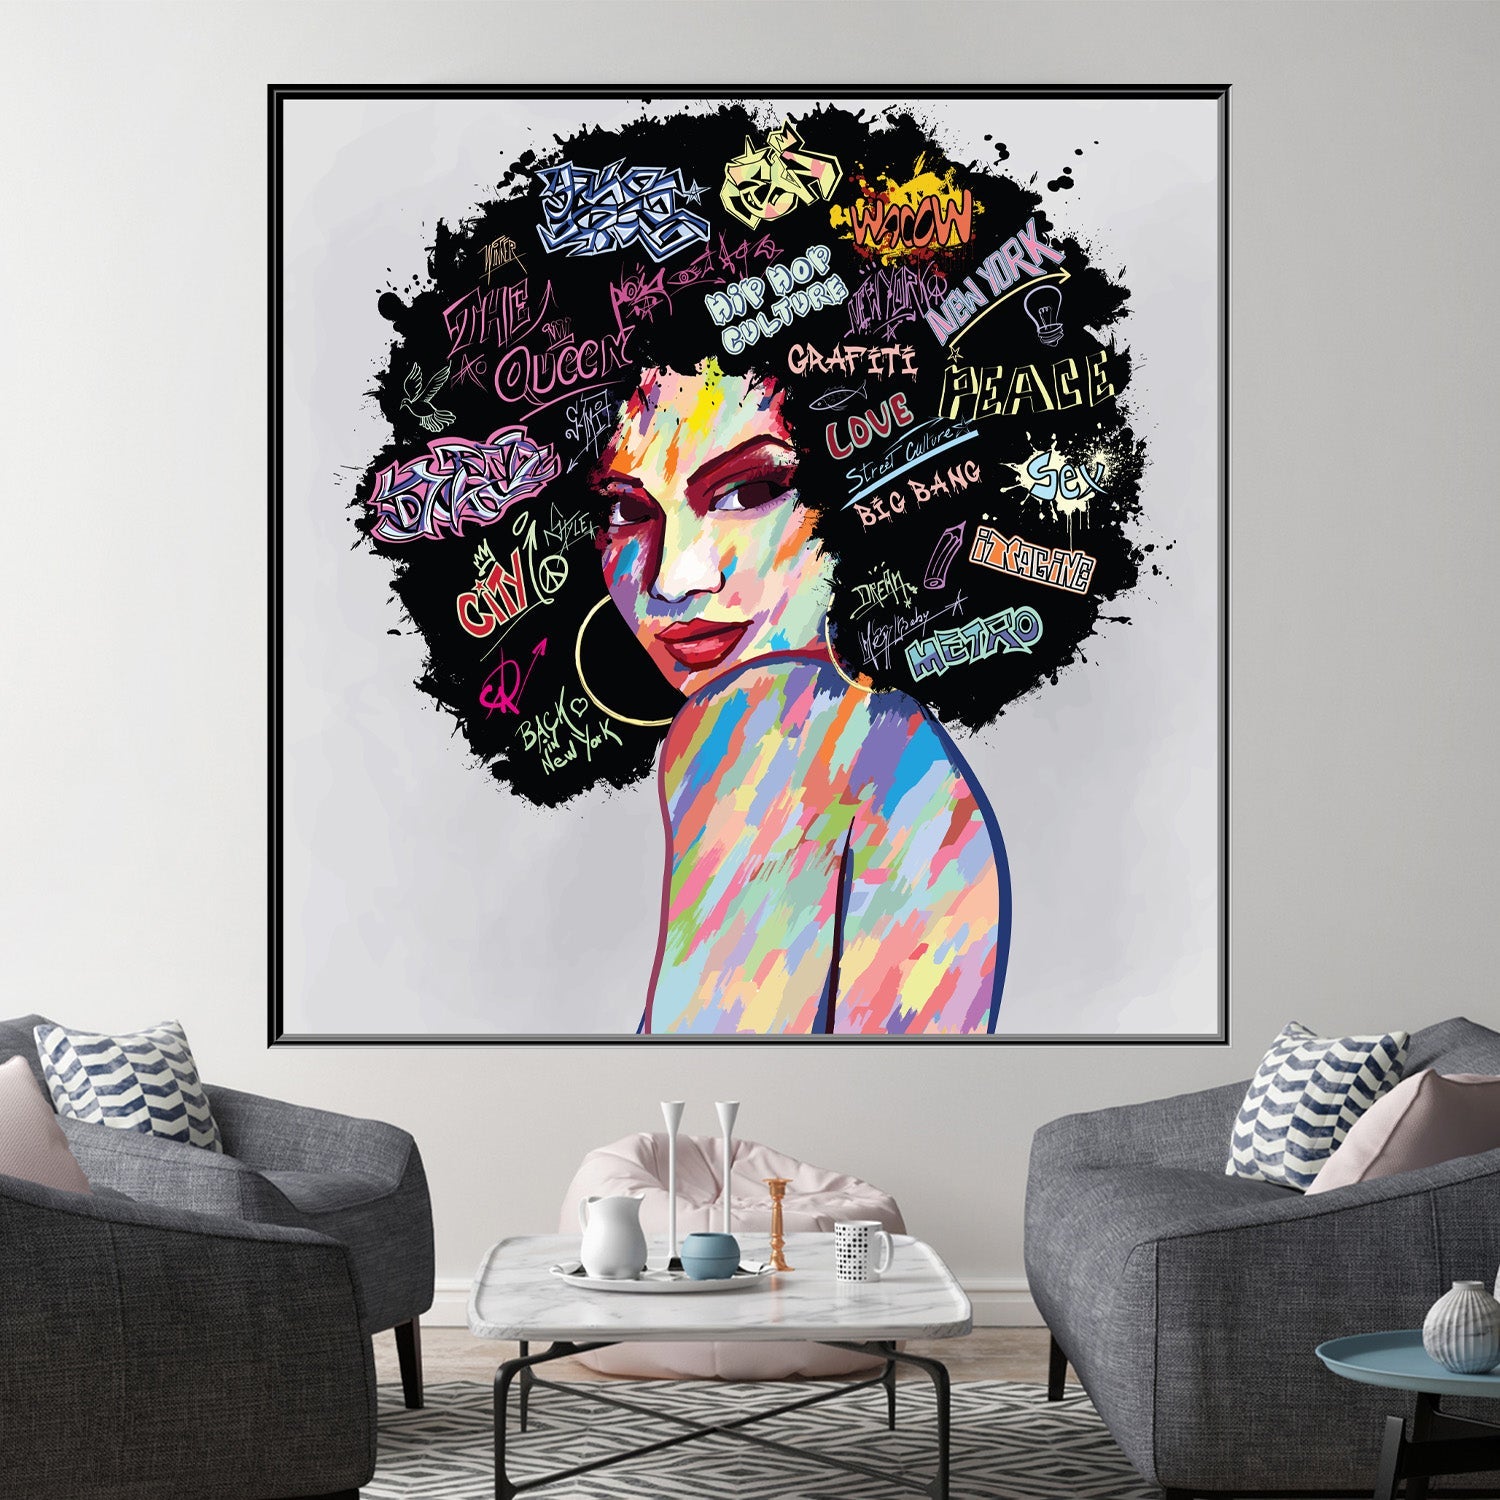 https://cdn.shopify.com/s/files/1/0387/9986/8044/products/HipHopWomanCanvasArtprintStretched-3.jpg